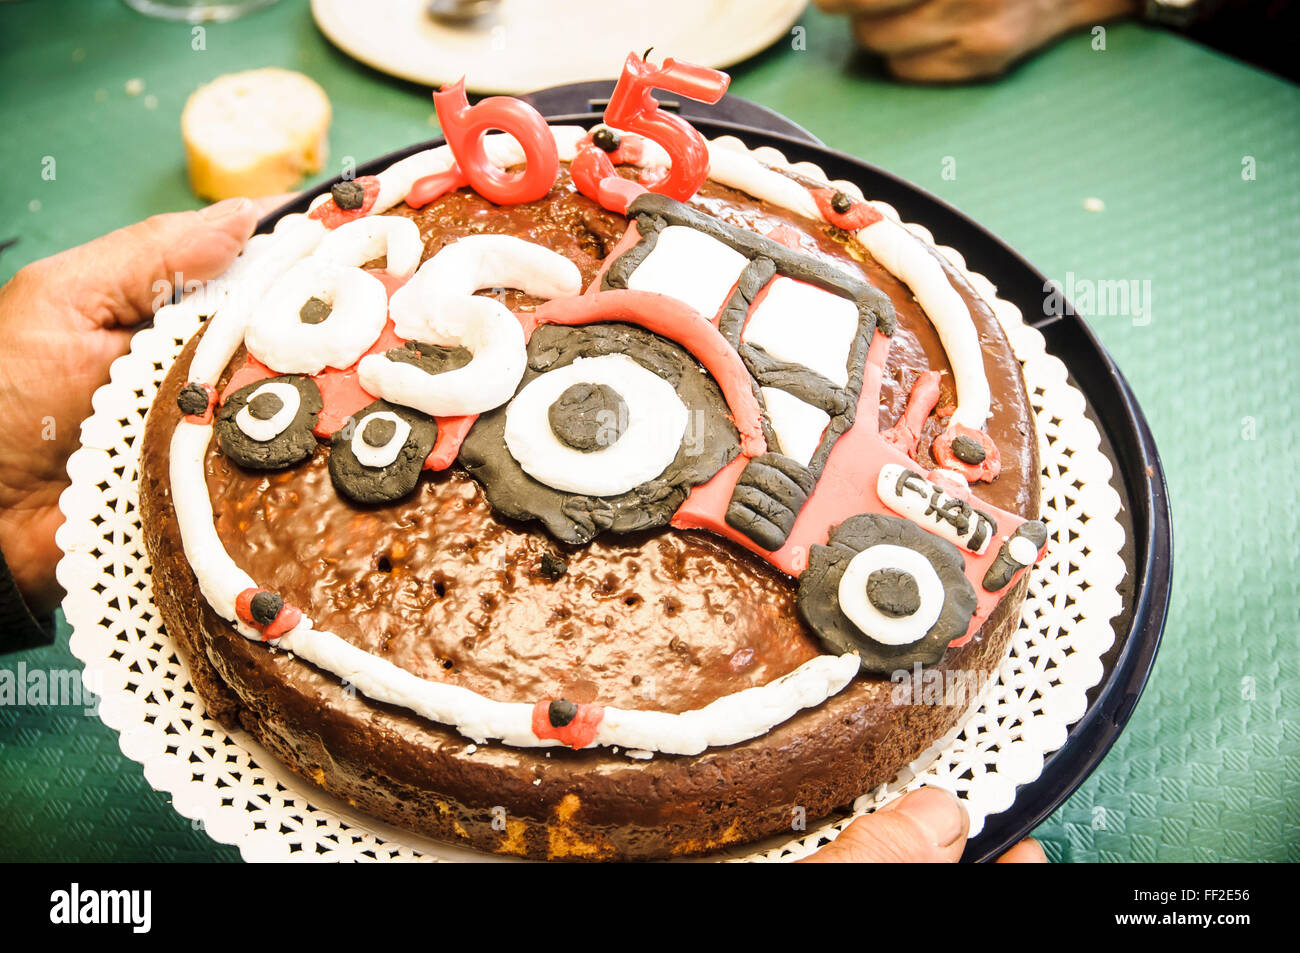 65 birthday cake with candles and chocolate tractor Stock Photo